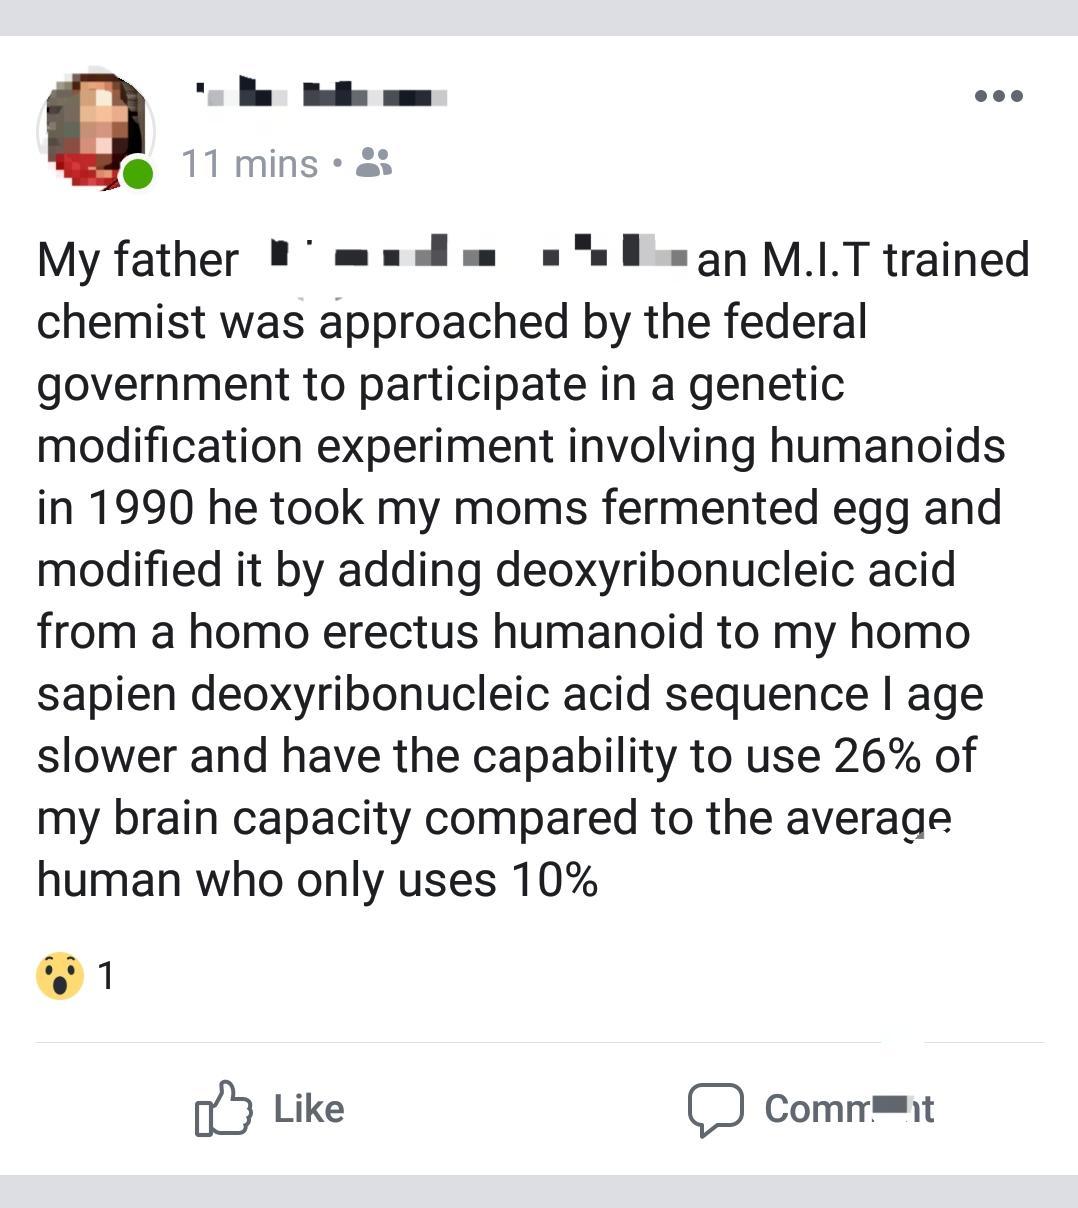 sweet story of wife and husband - 11 mins My father . . Lan M.I.T trained chemist was approached by the federal government to participate in a genetic modification experiment involving humanoids in 1990 he took my moms fermented egg and modified it by add